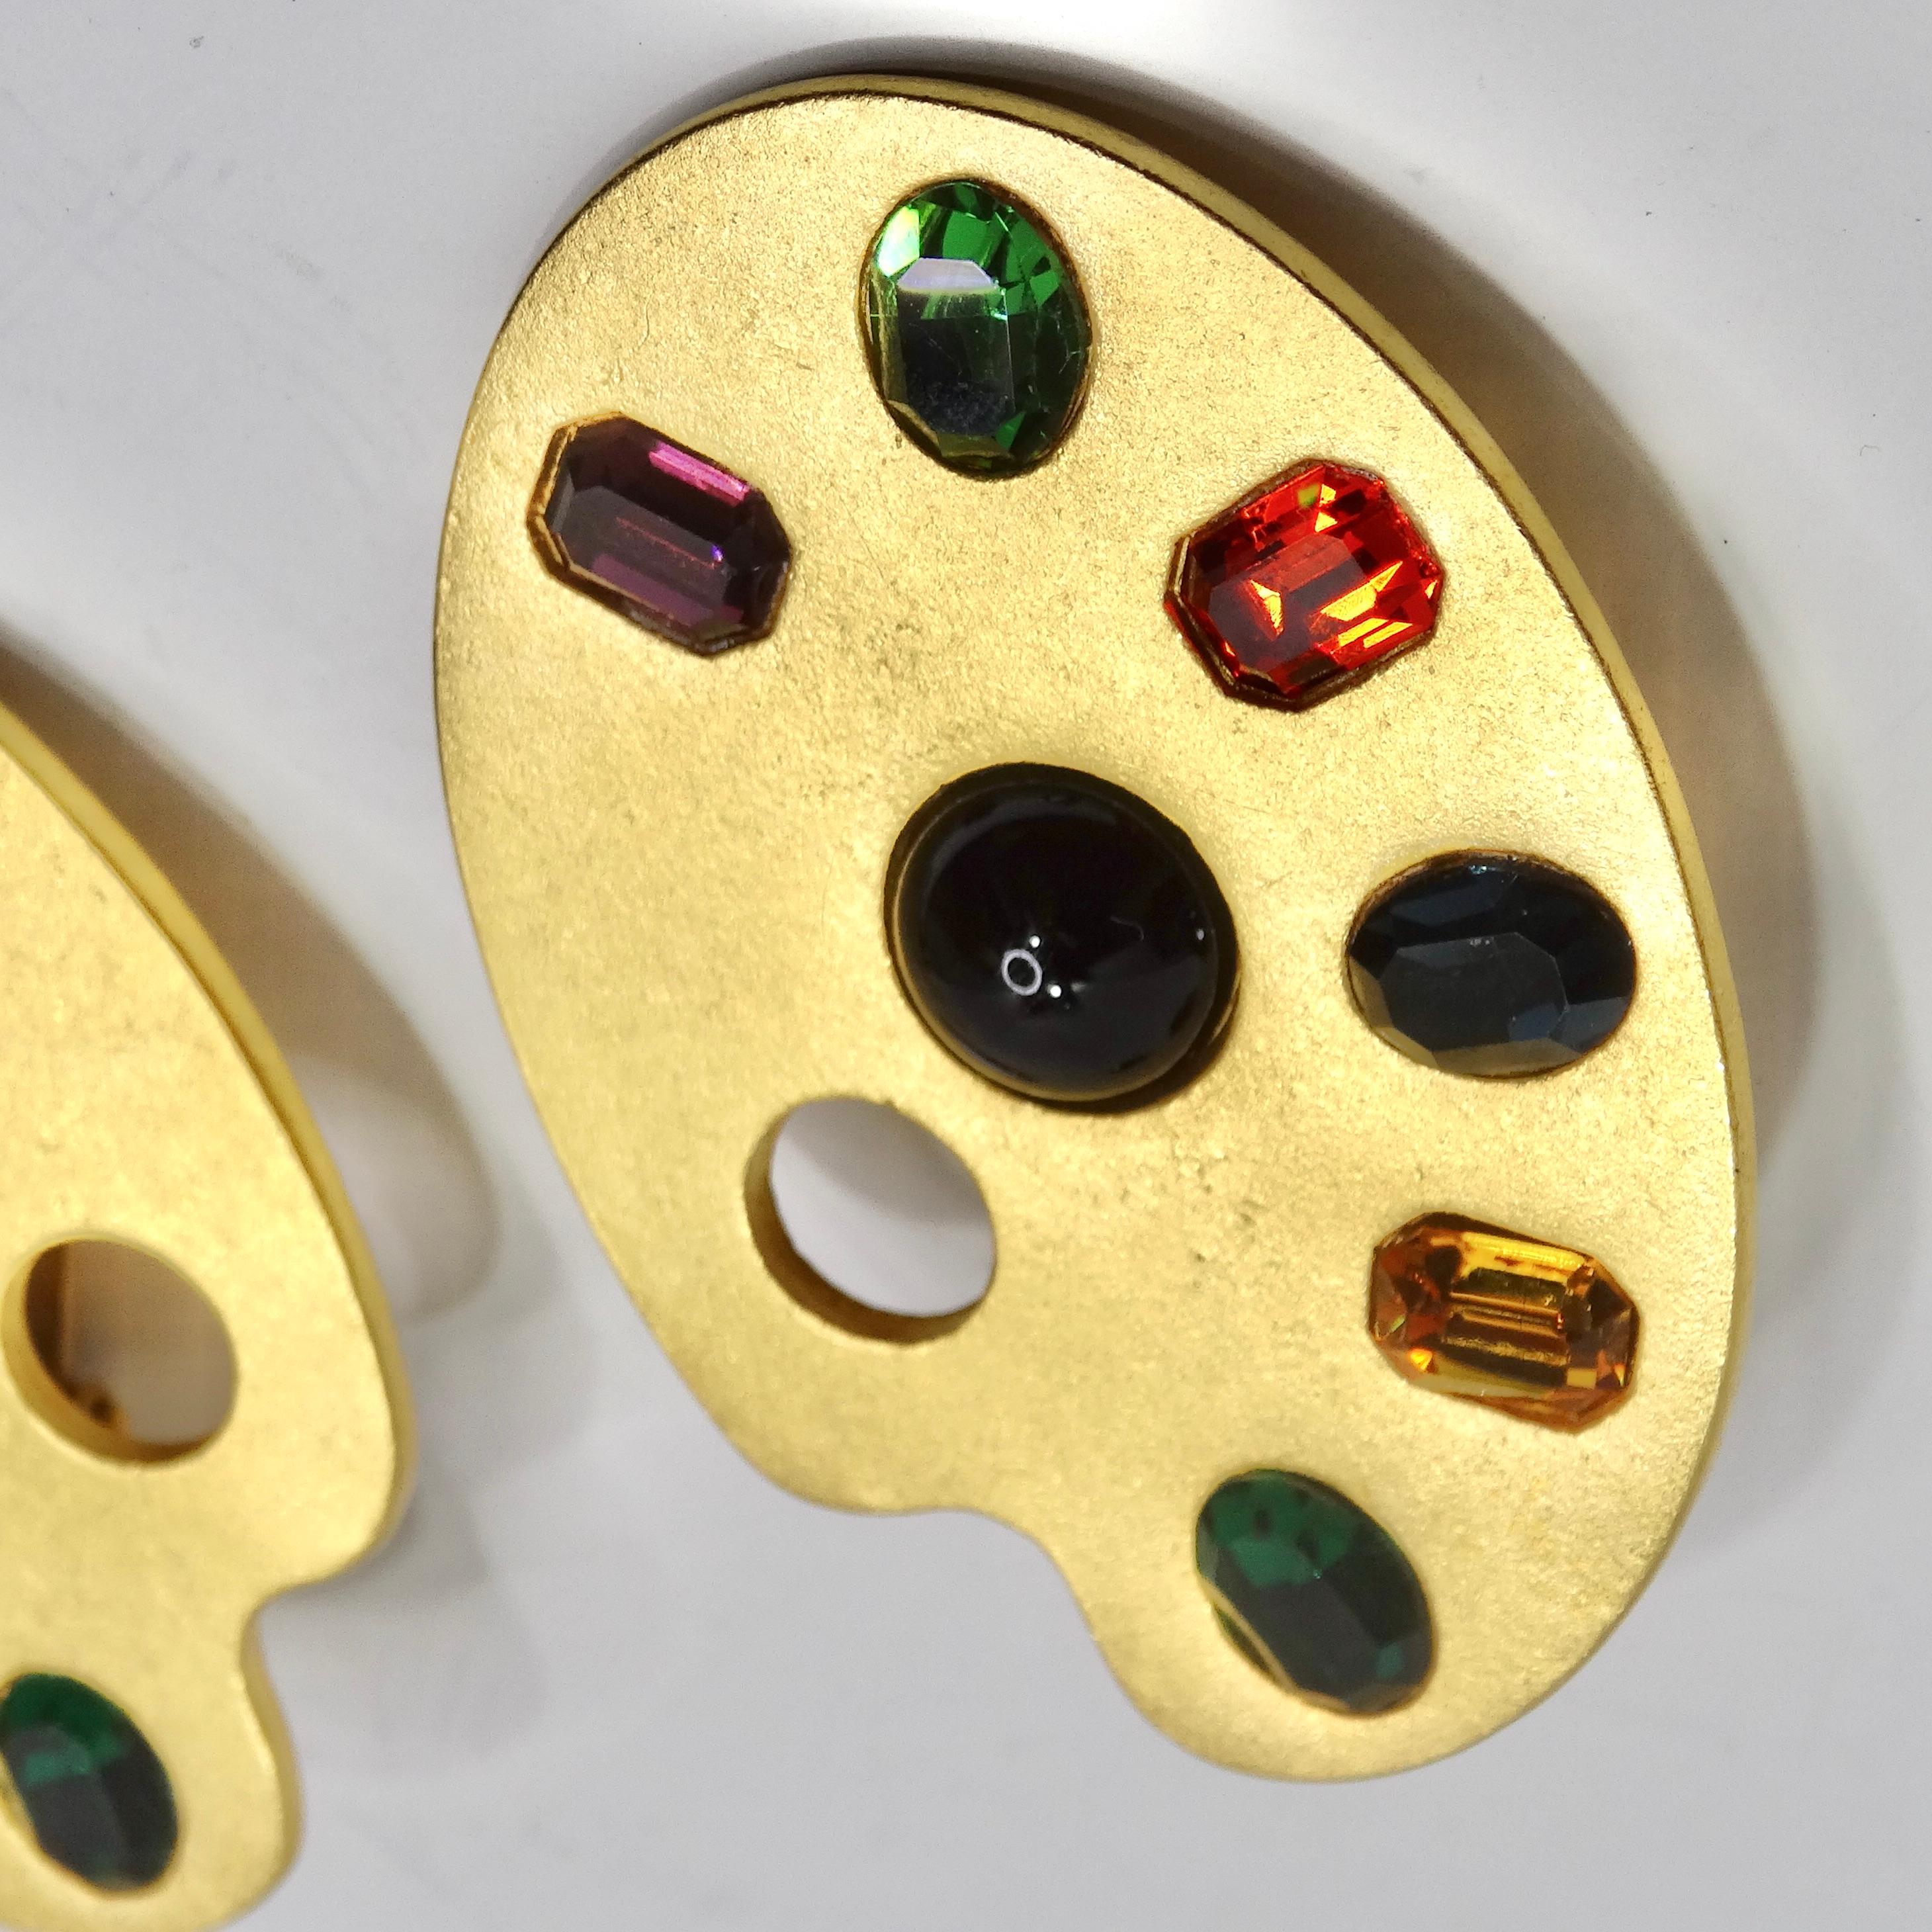 Introducing the Karl Lagerfeld 1980s Gold Plated Paint Palette Motif Multicolor Gem Earrings – a wearable masterpiece that transcends the boundaries of fashion and art. These stunning vibrant yellow gold plated earrings are ingeniously shaped like a